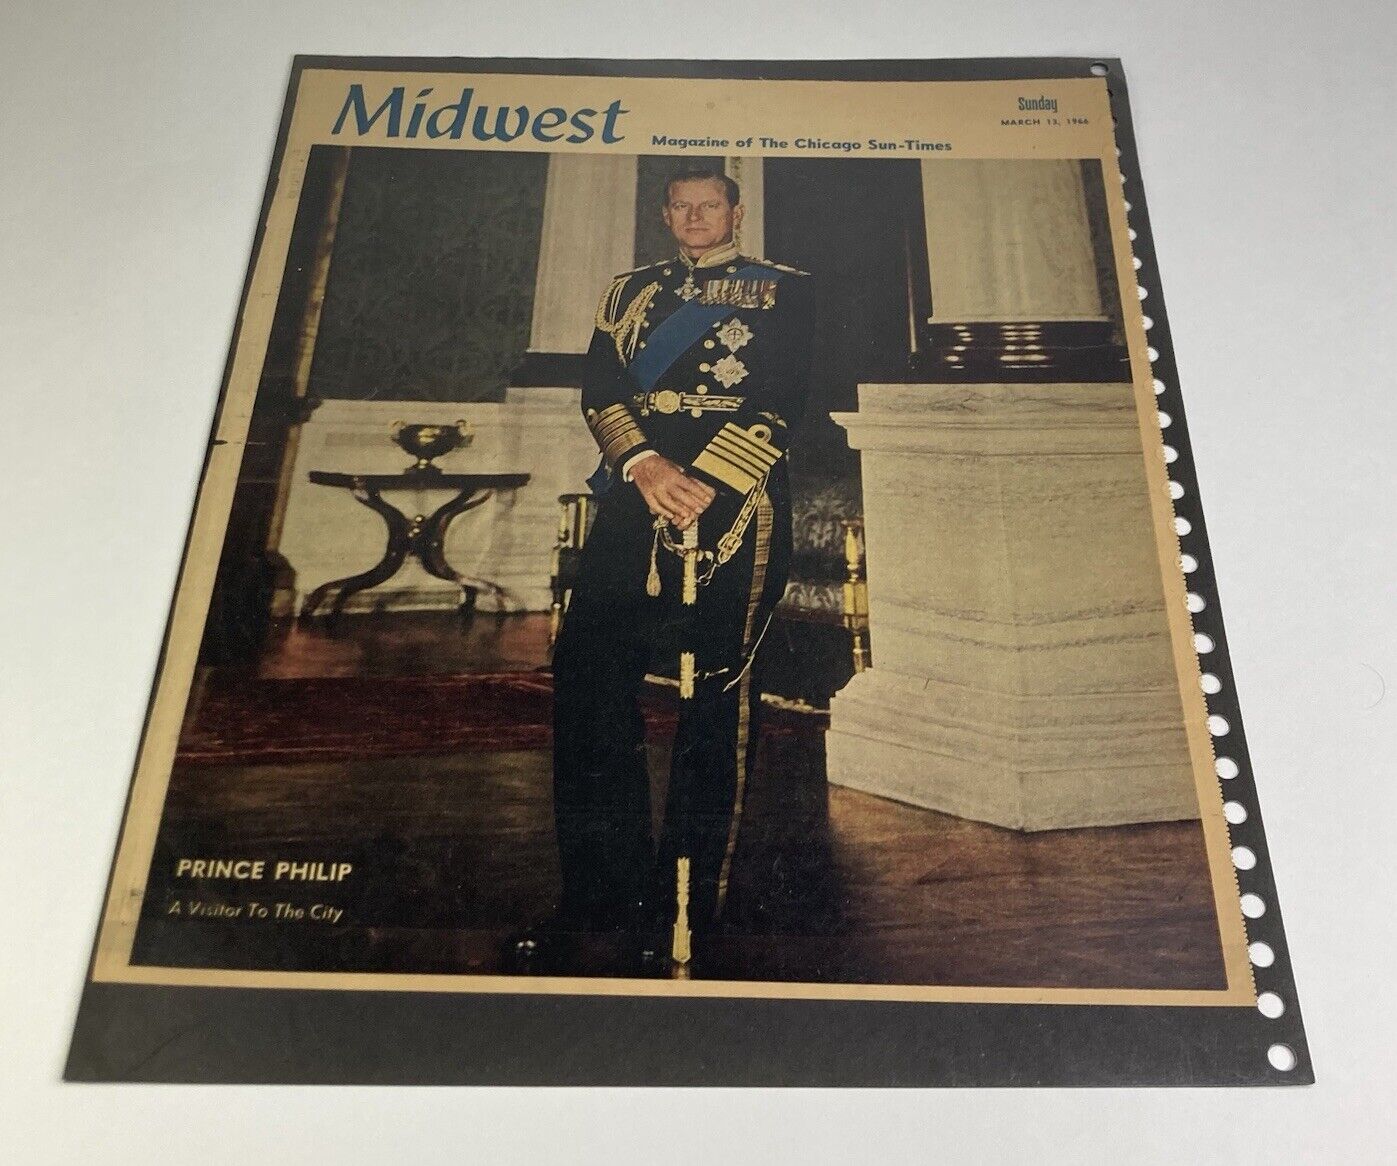 Vtg 1966 Midwest Magazine of The Chicago Sun-Times “Prince Philip: A Visitor To